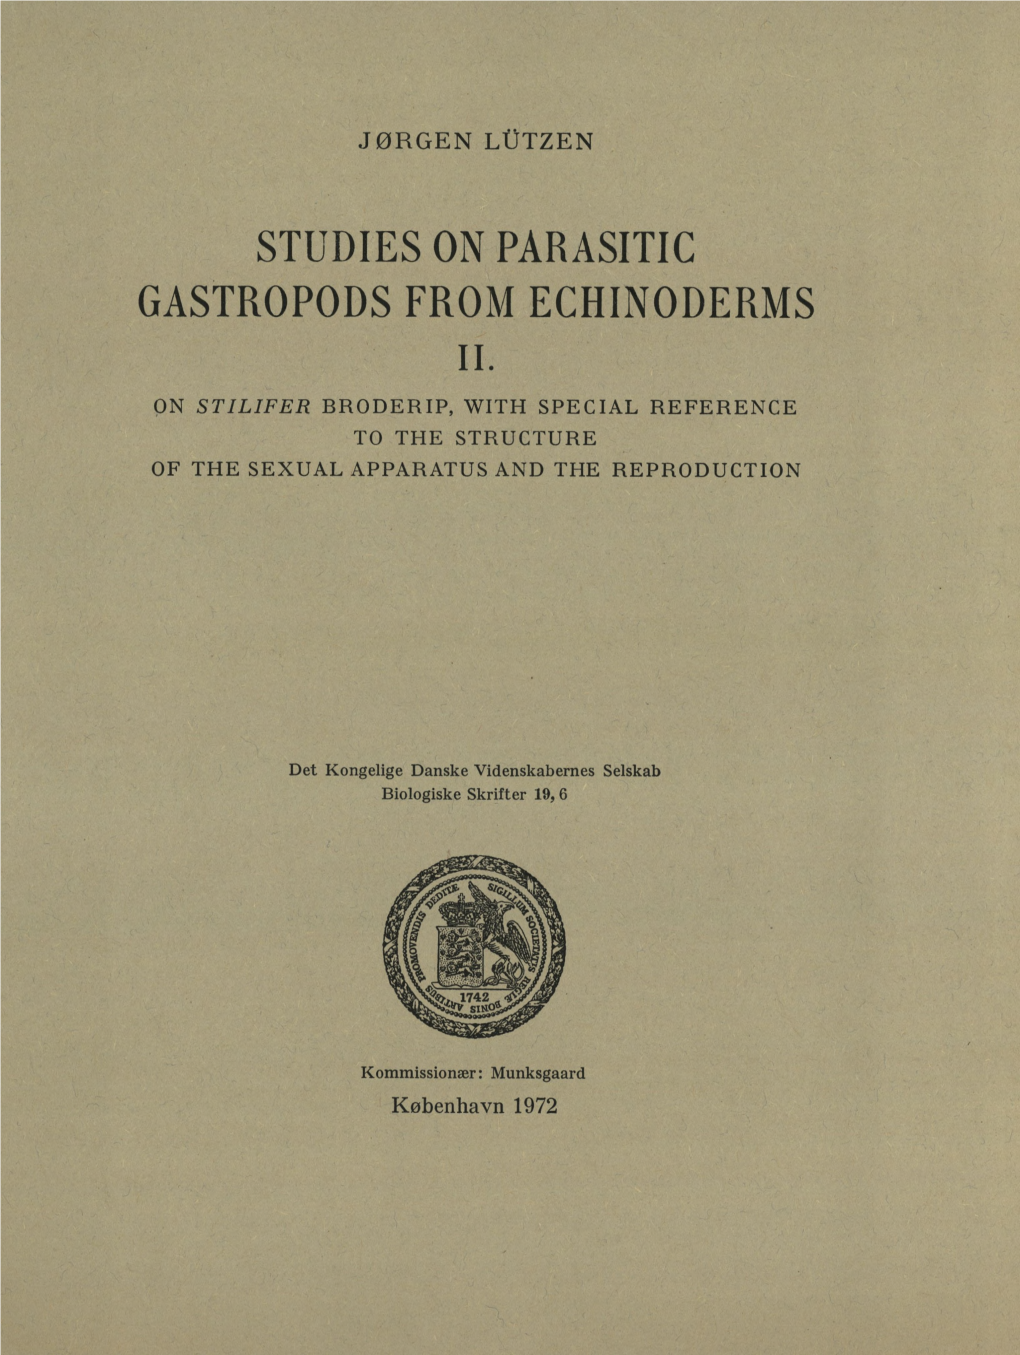 Studies on Parasitic Gastropods from Echinoderms Ii